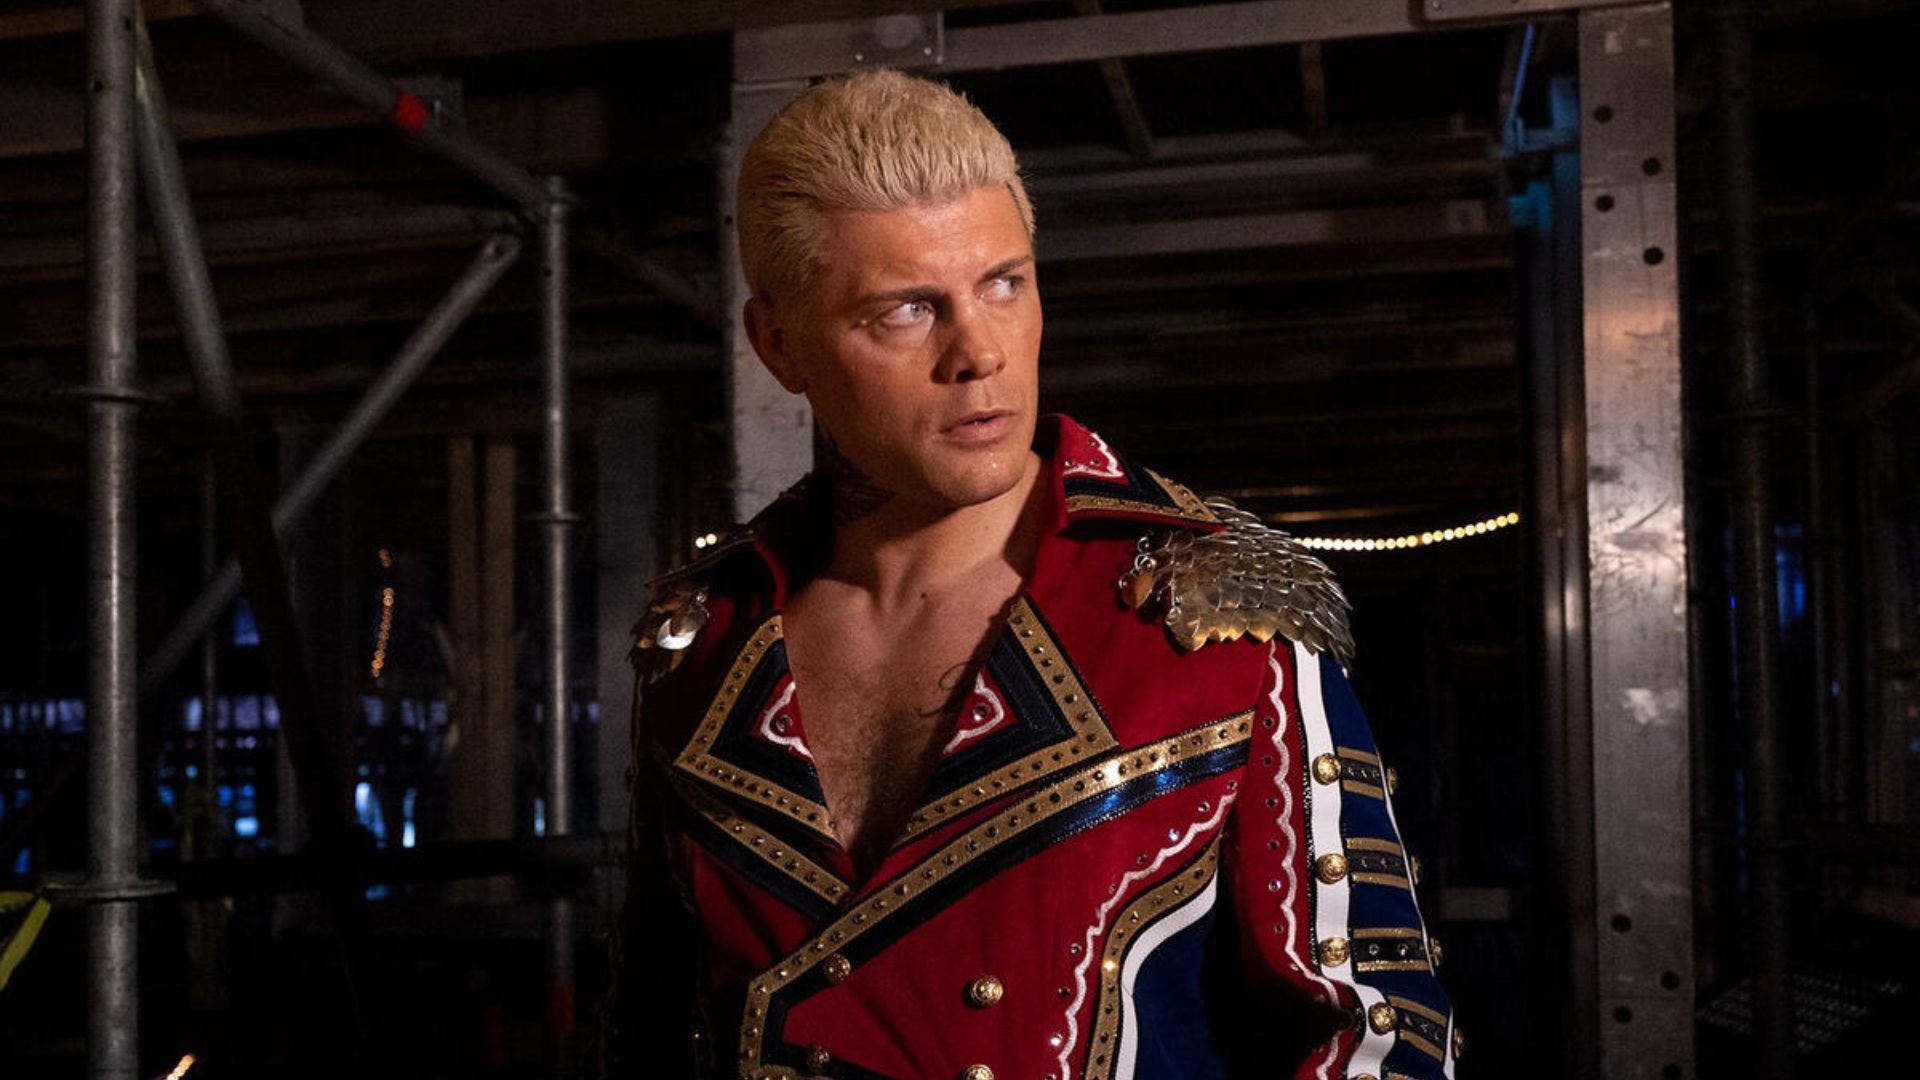 What is next for Cody Rhodes in WWE?